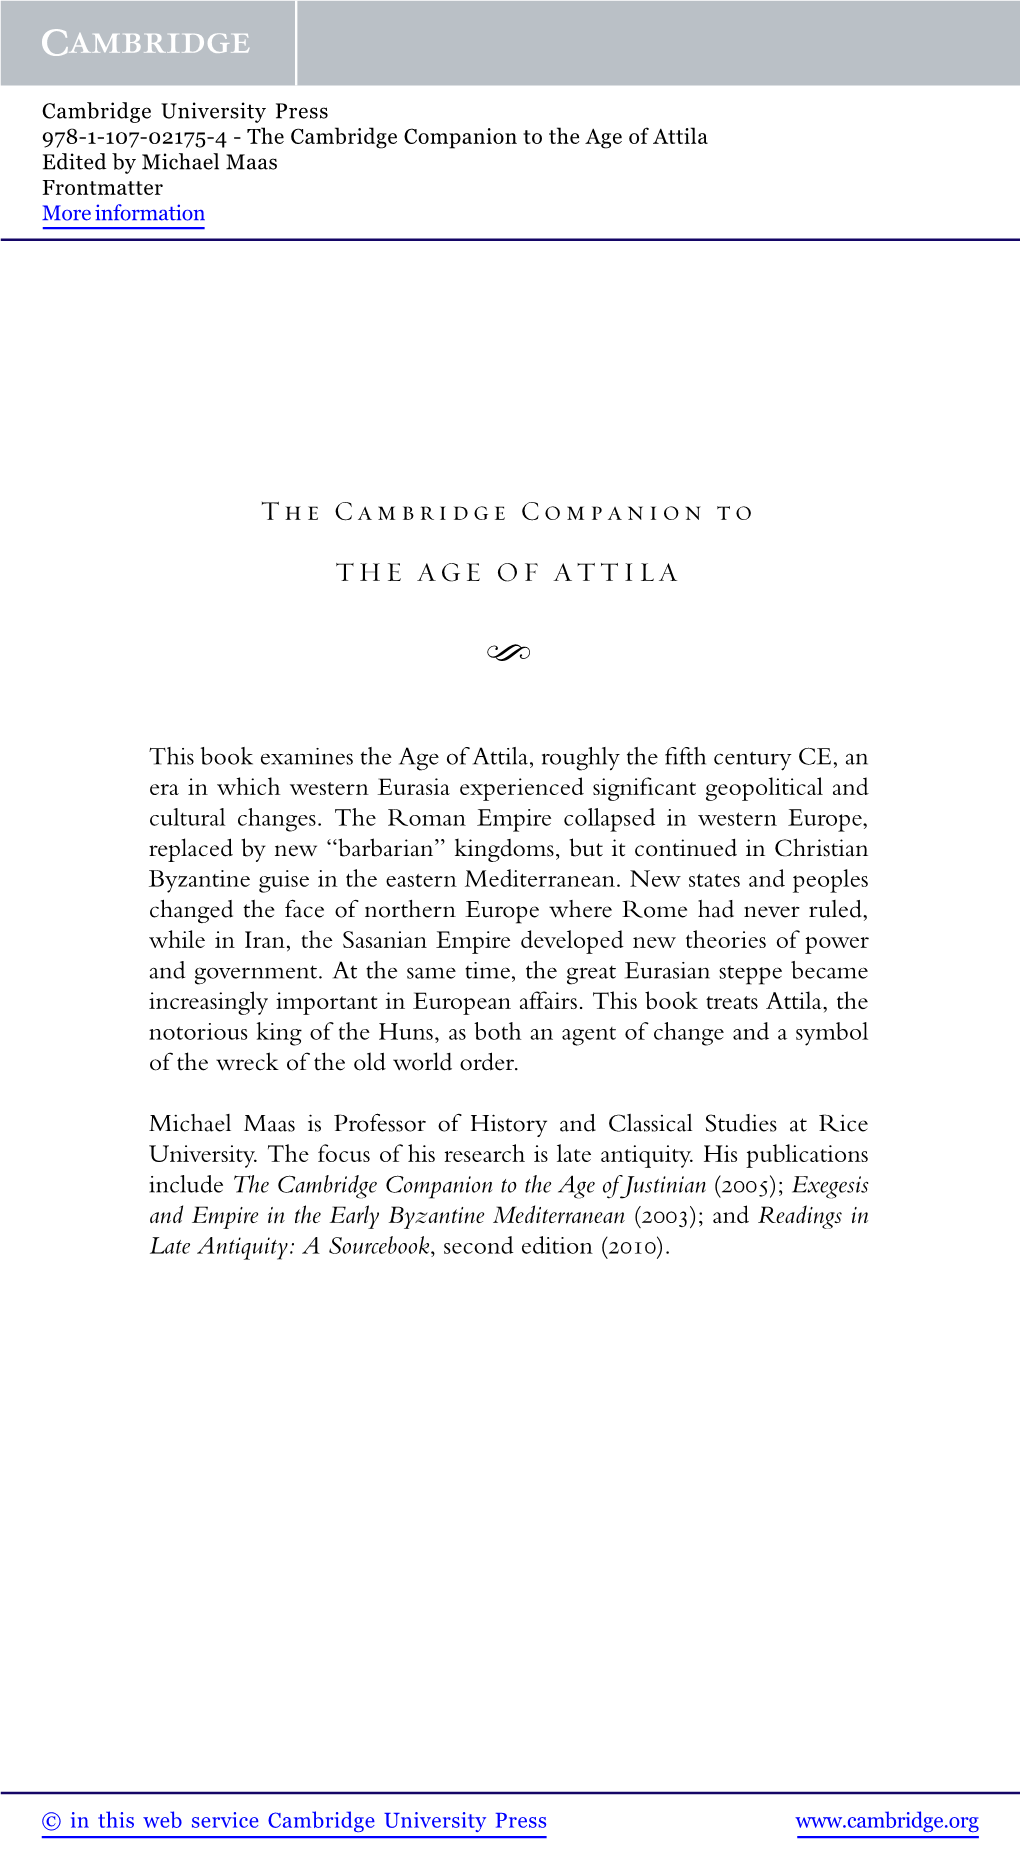 The Cambridge Companion to the Age of Attila Edited by Michael Maas Frontmatter More Information